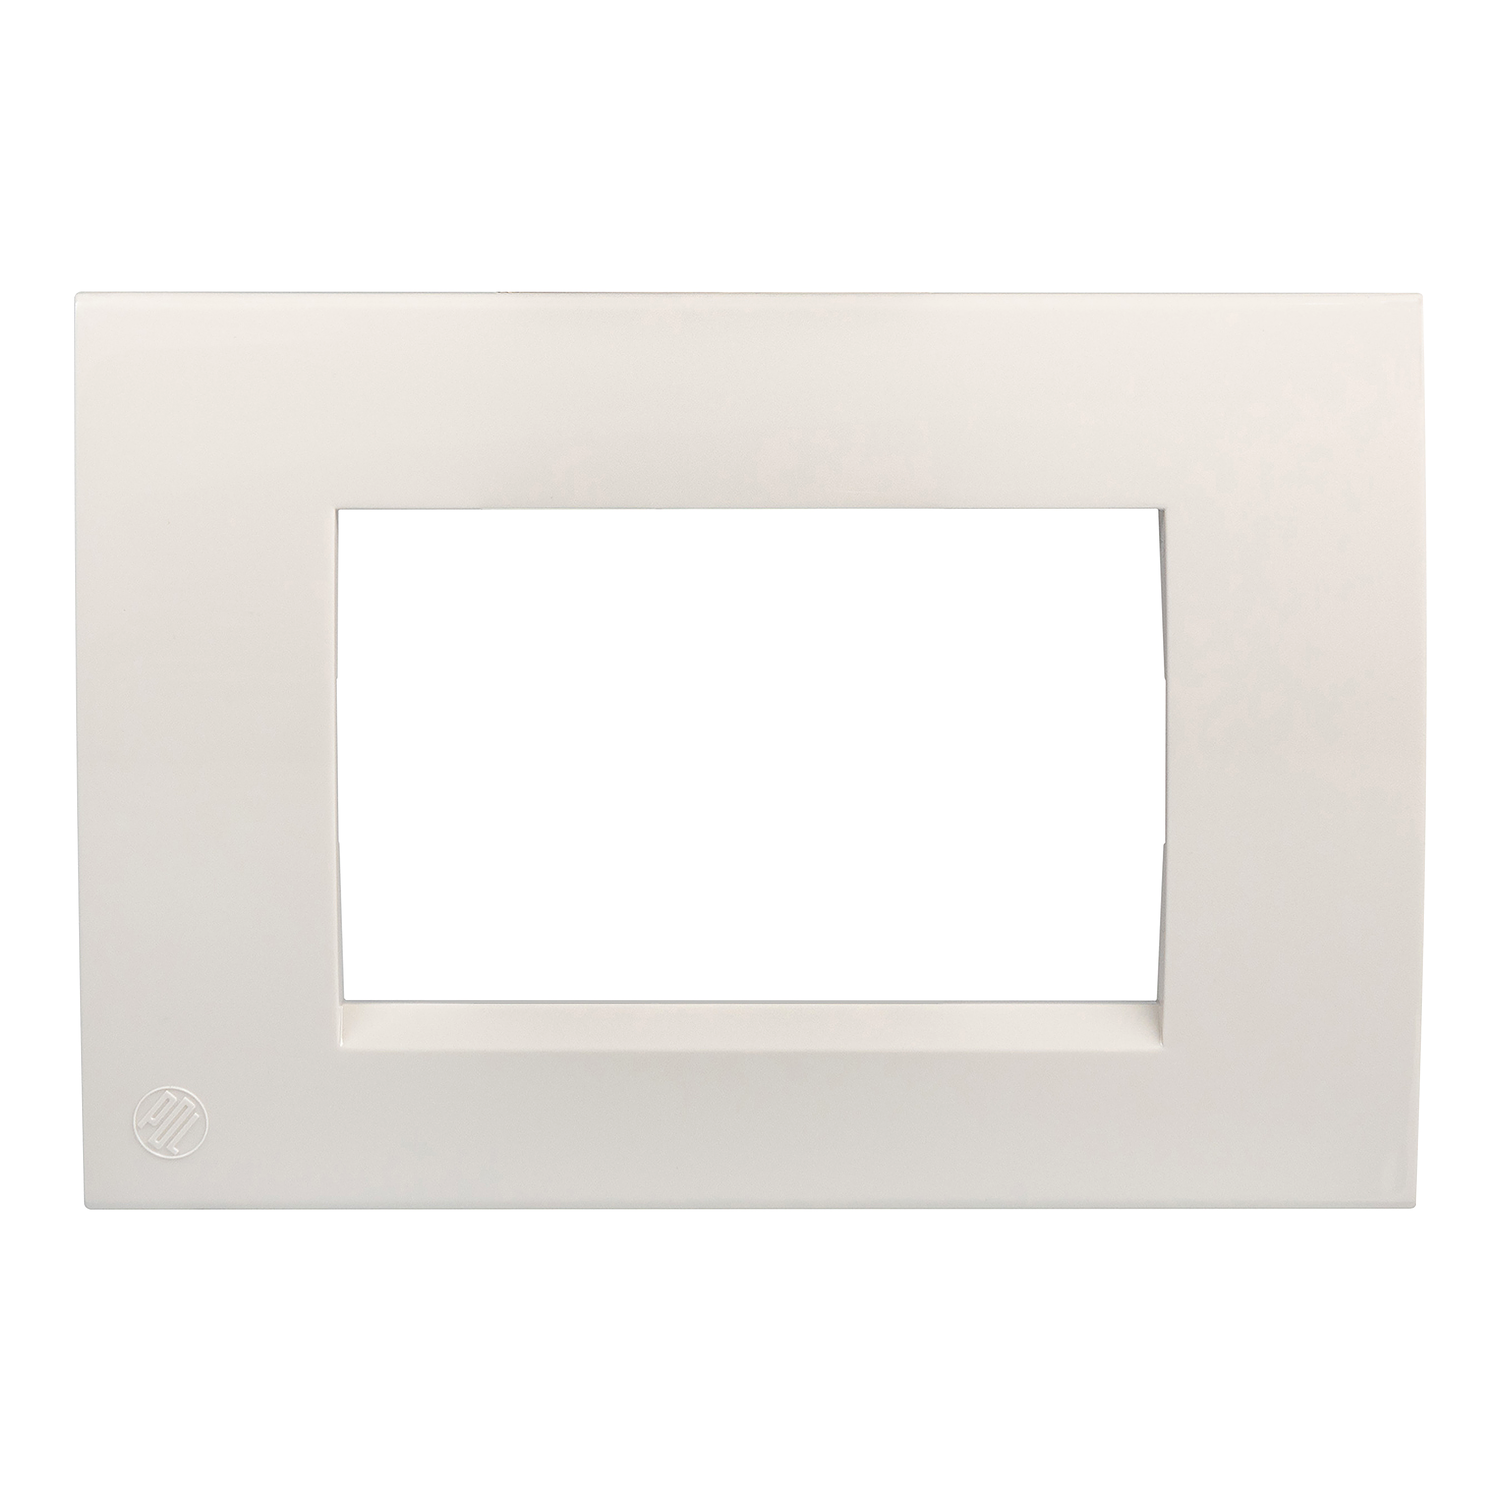 Surround and grid plate - Modena 800 Series - polycarbonate